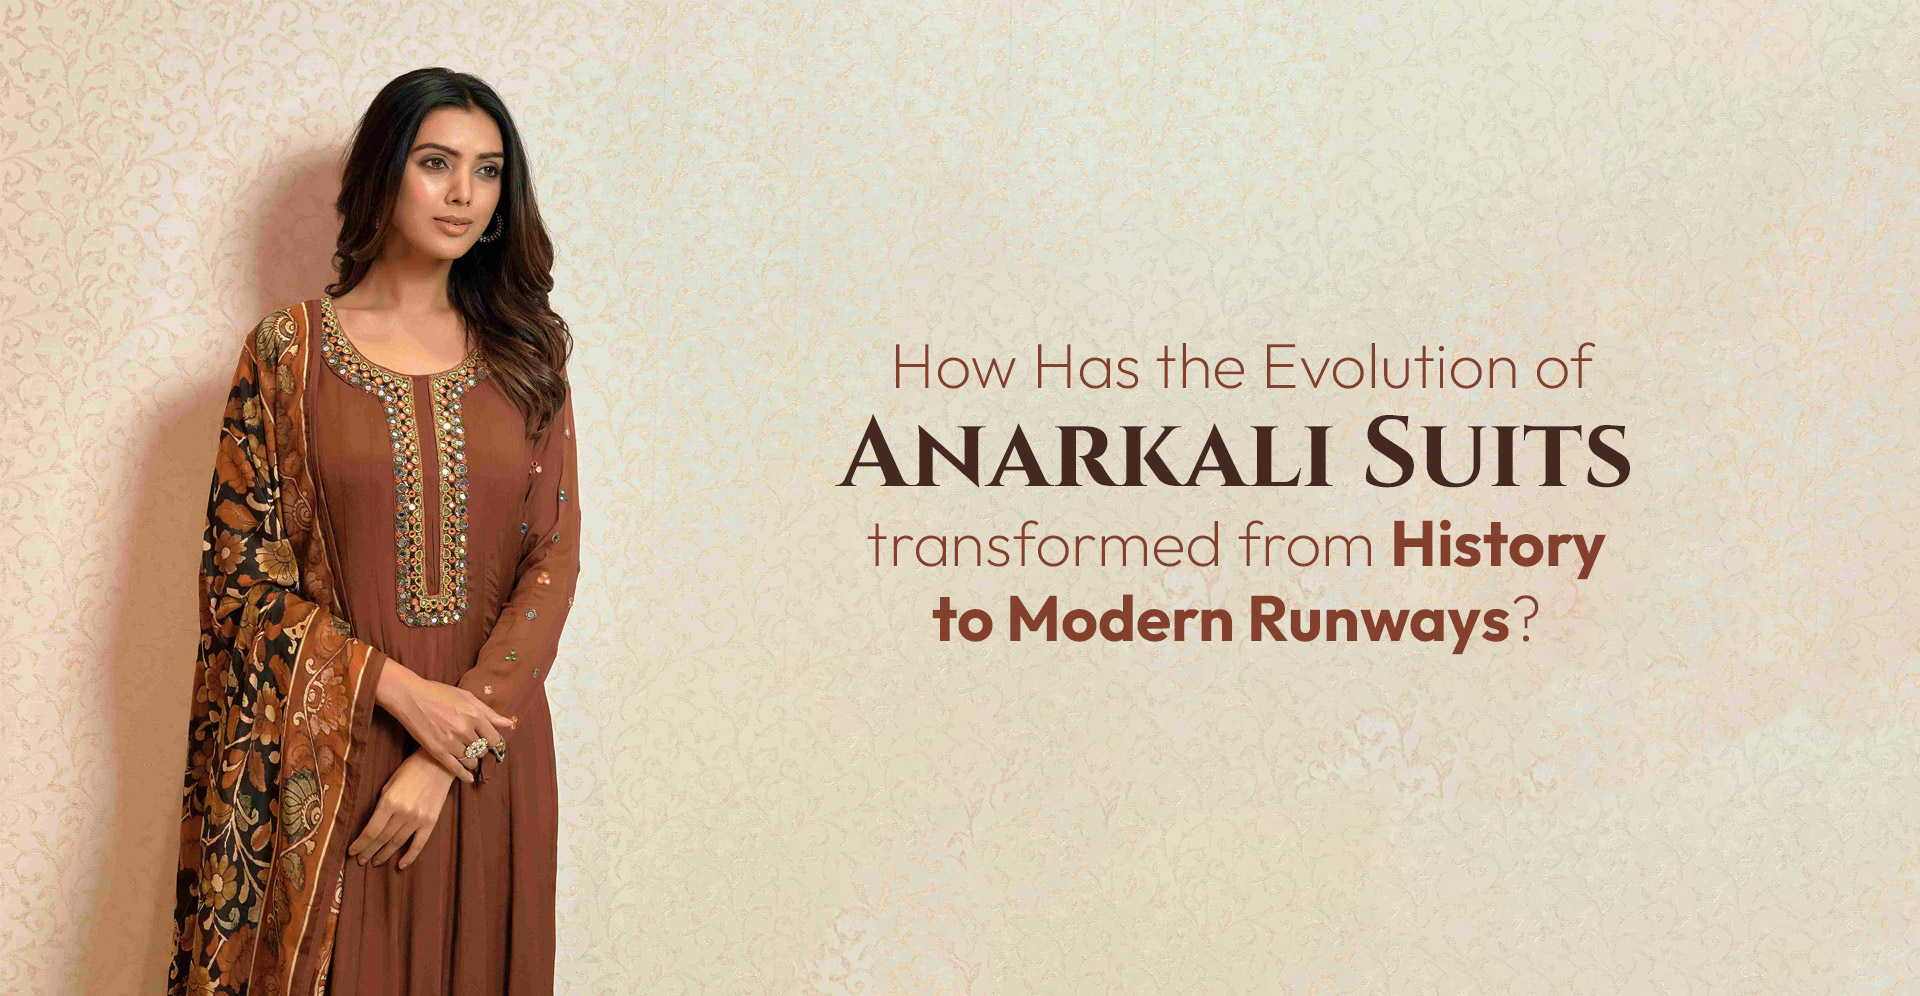 How Has the Evolution of Anarkali Suits Transformed from History to Modern Runways?